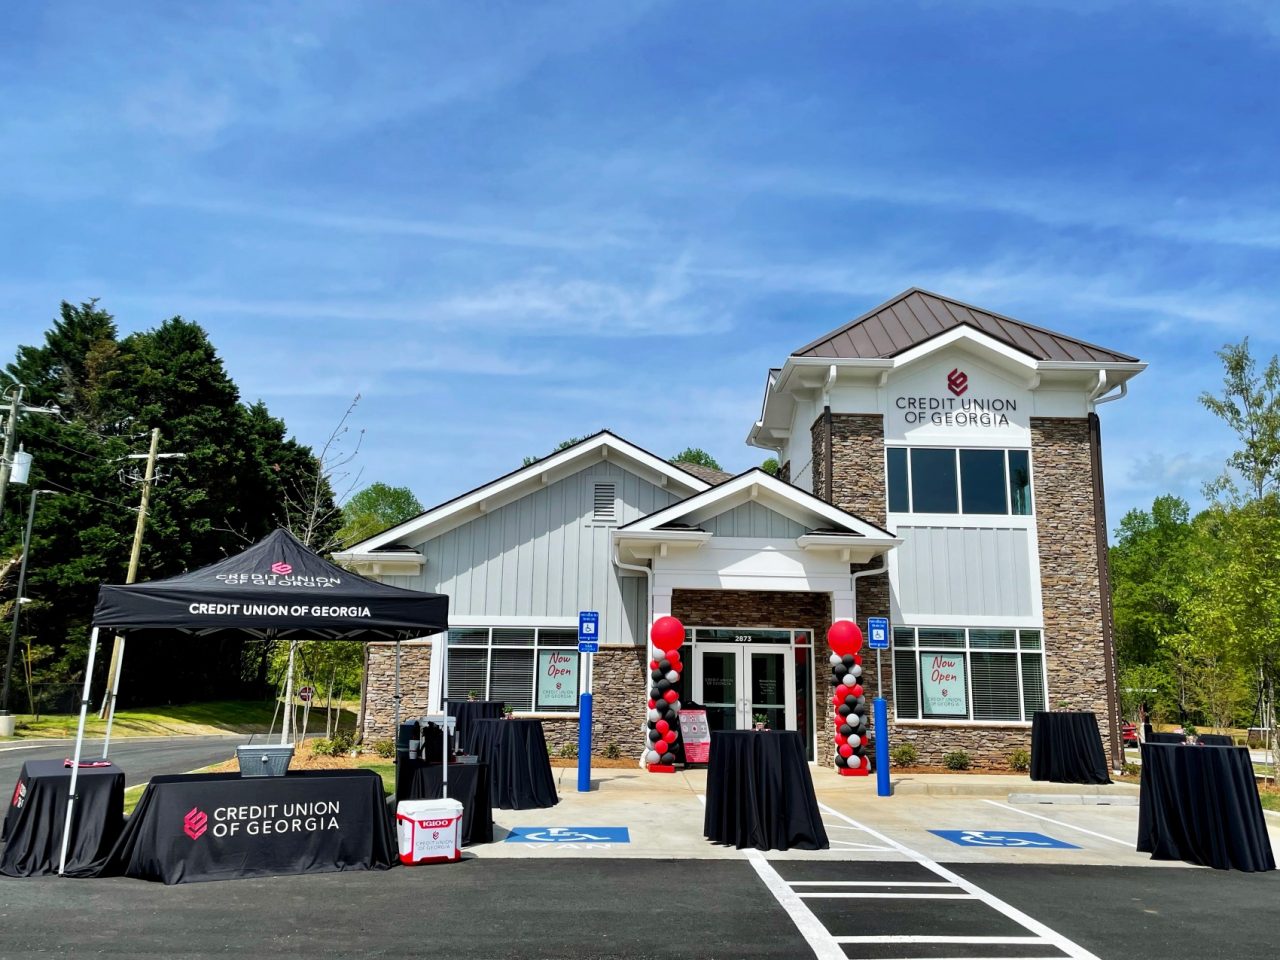 Credit Union of Grand Opening in Hickory Flat